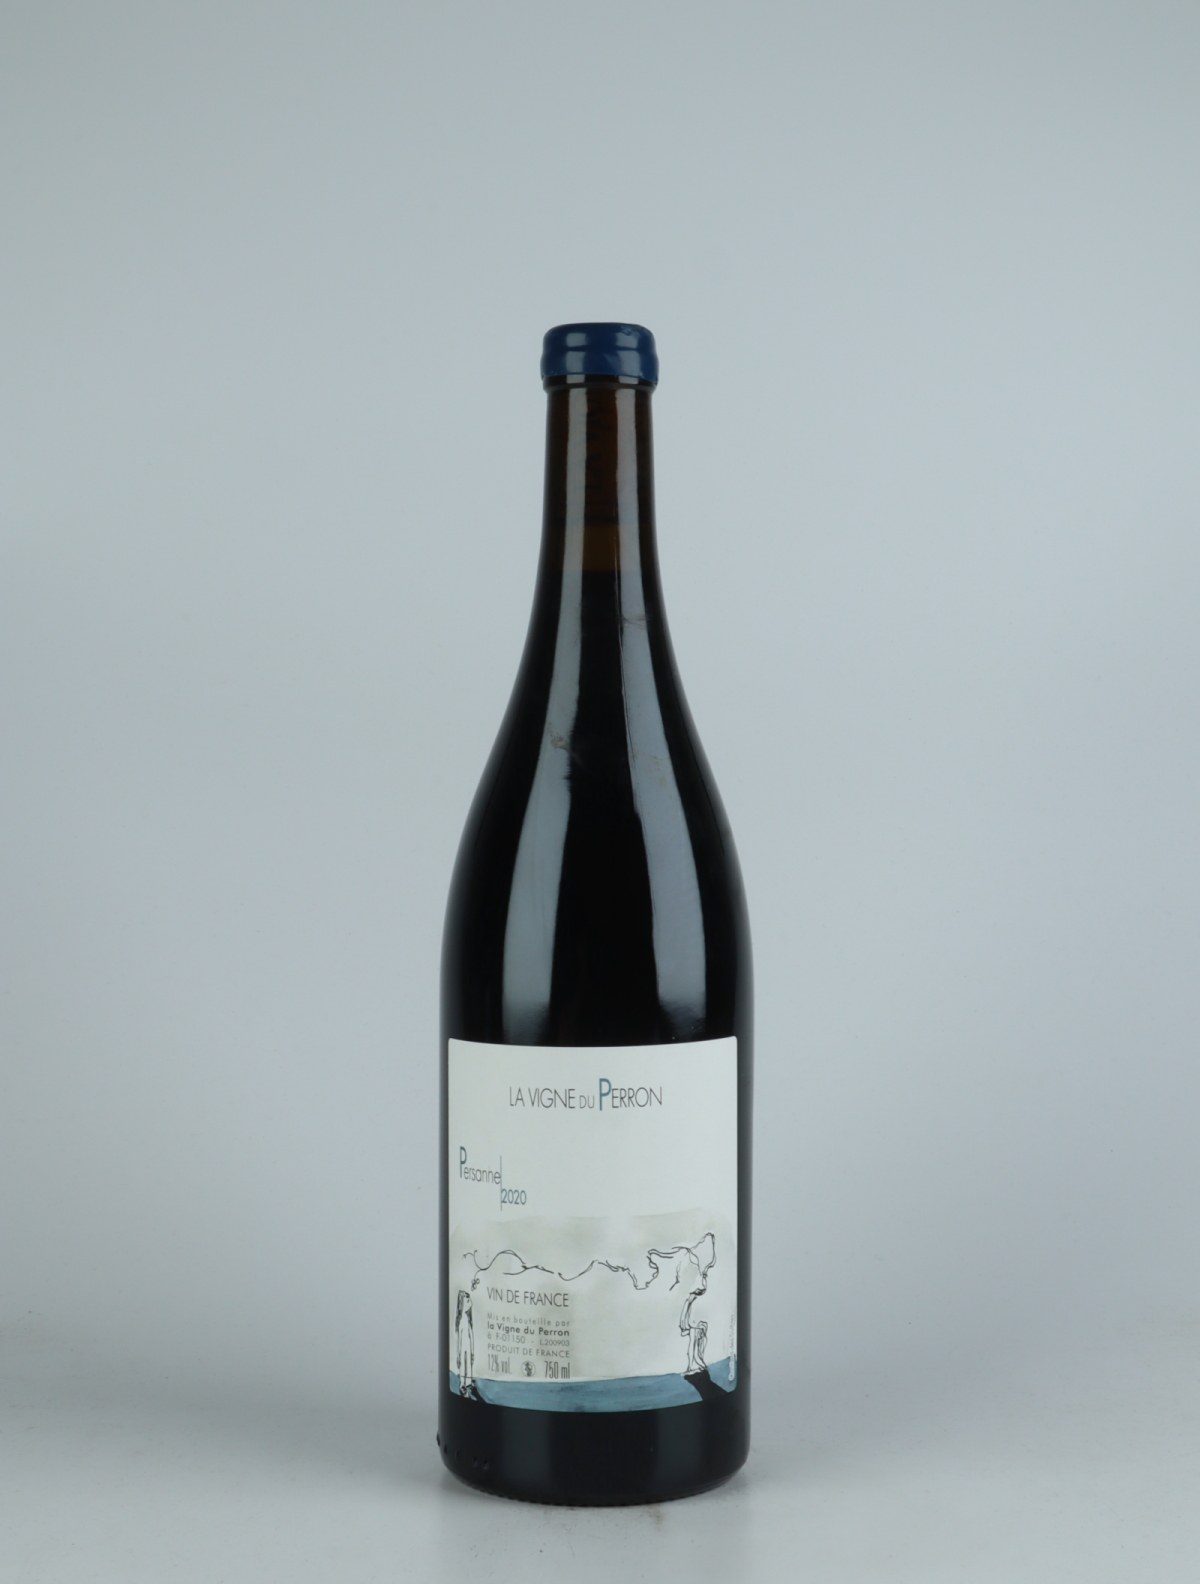 A bottle 2020 Persanne Red wine from Domaine du Perron, Bugey in France